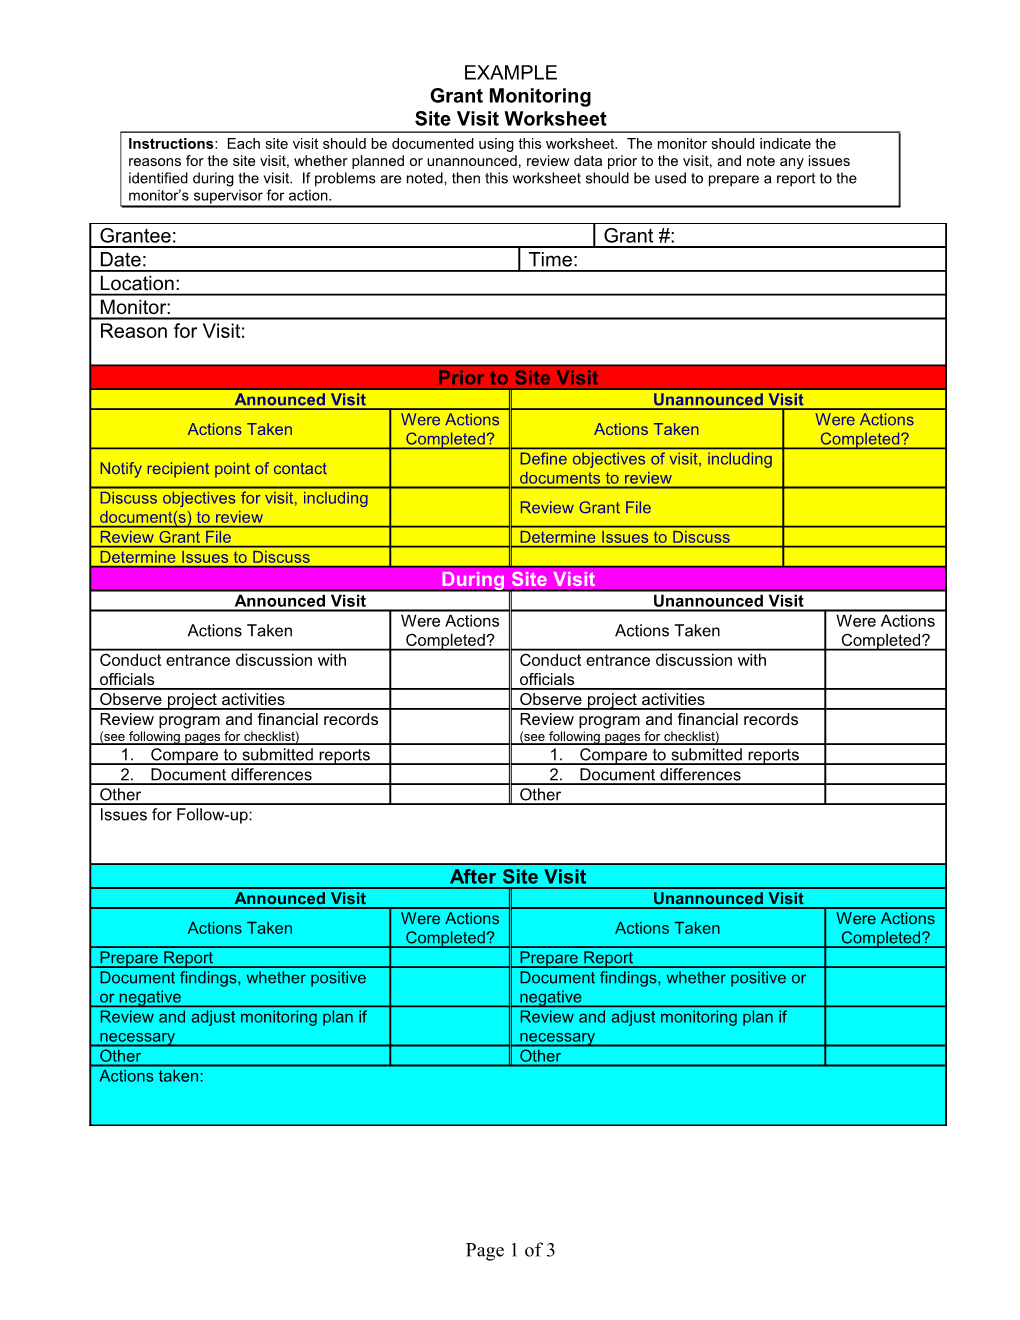 Instructions: Each Site Visit Should Be Documented Using This Worksheet